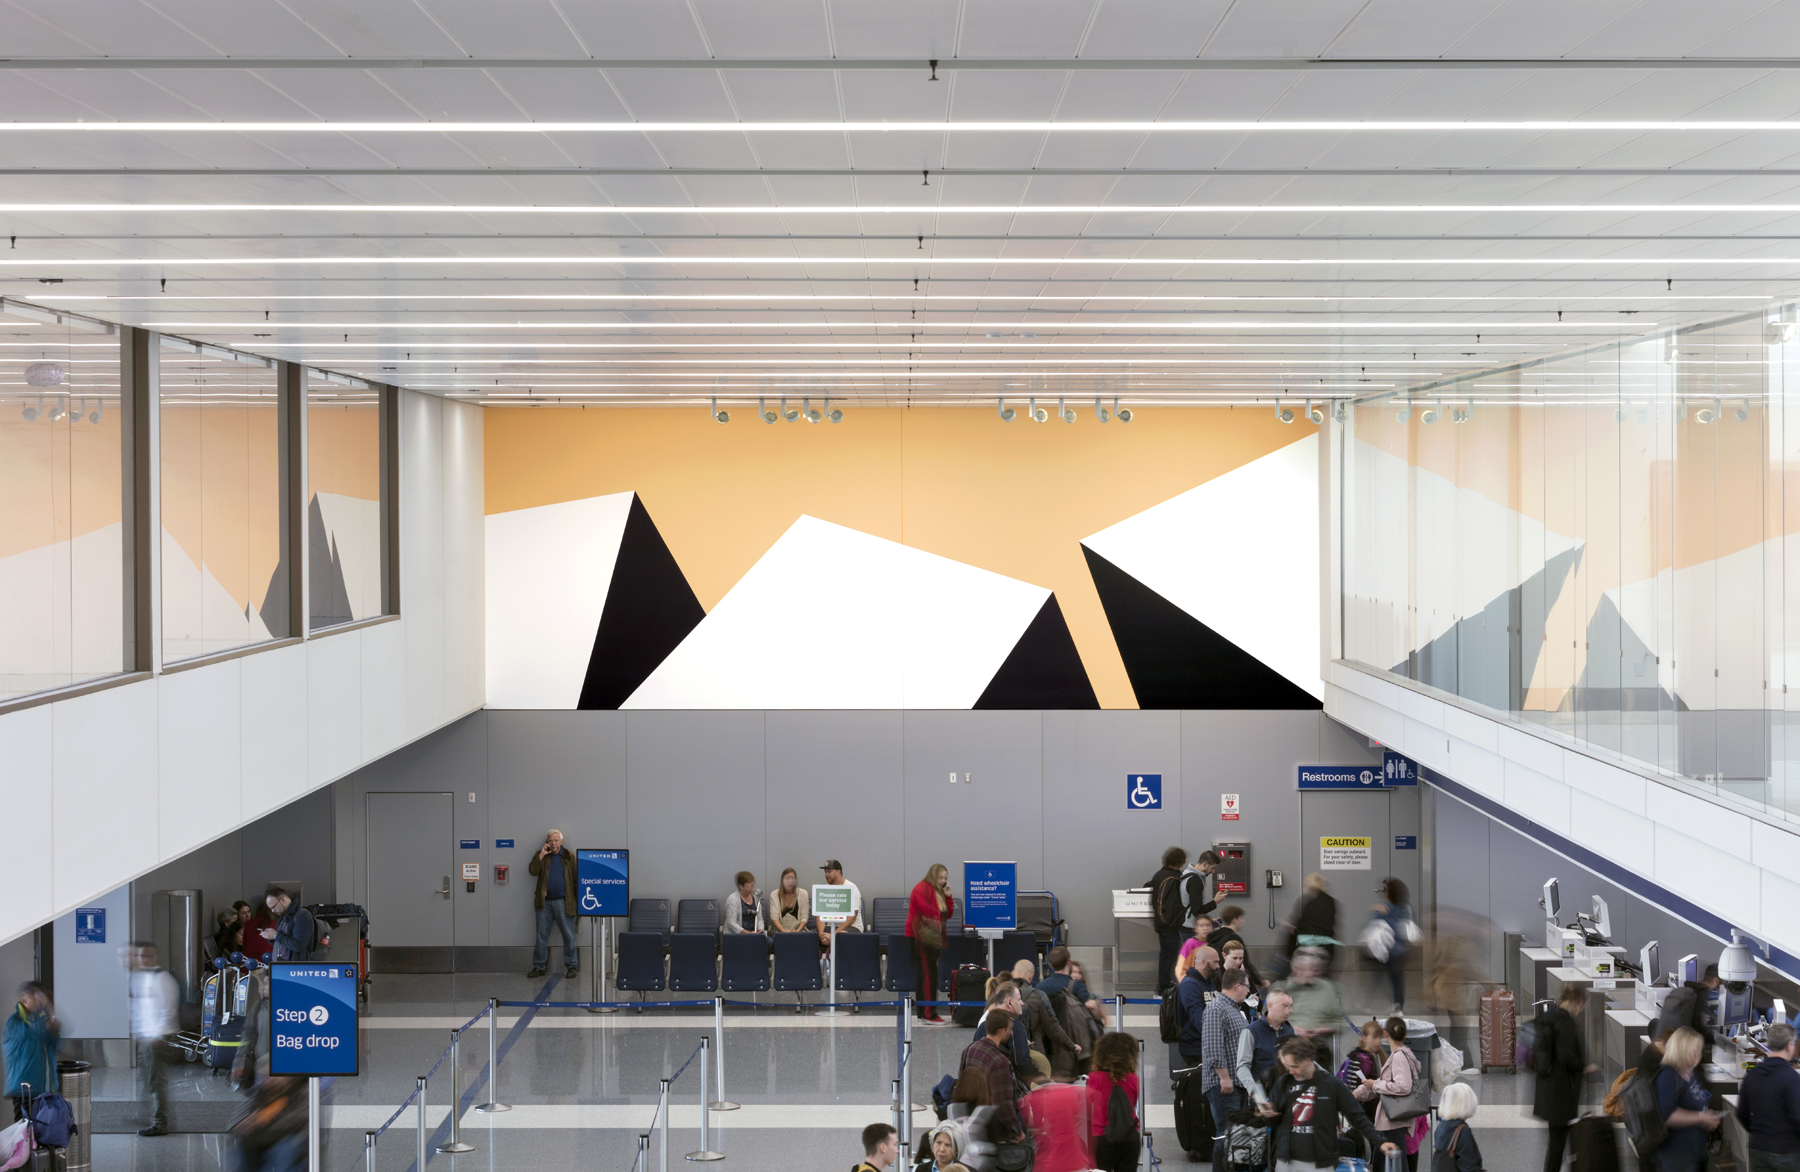 Tofer Chin Mural Installation LAX Airport